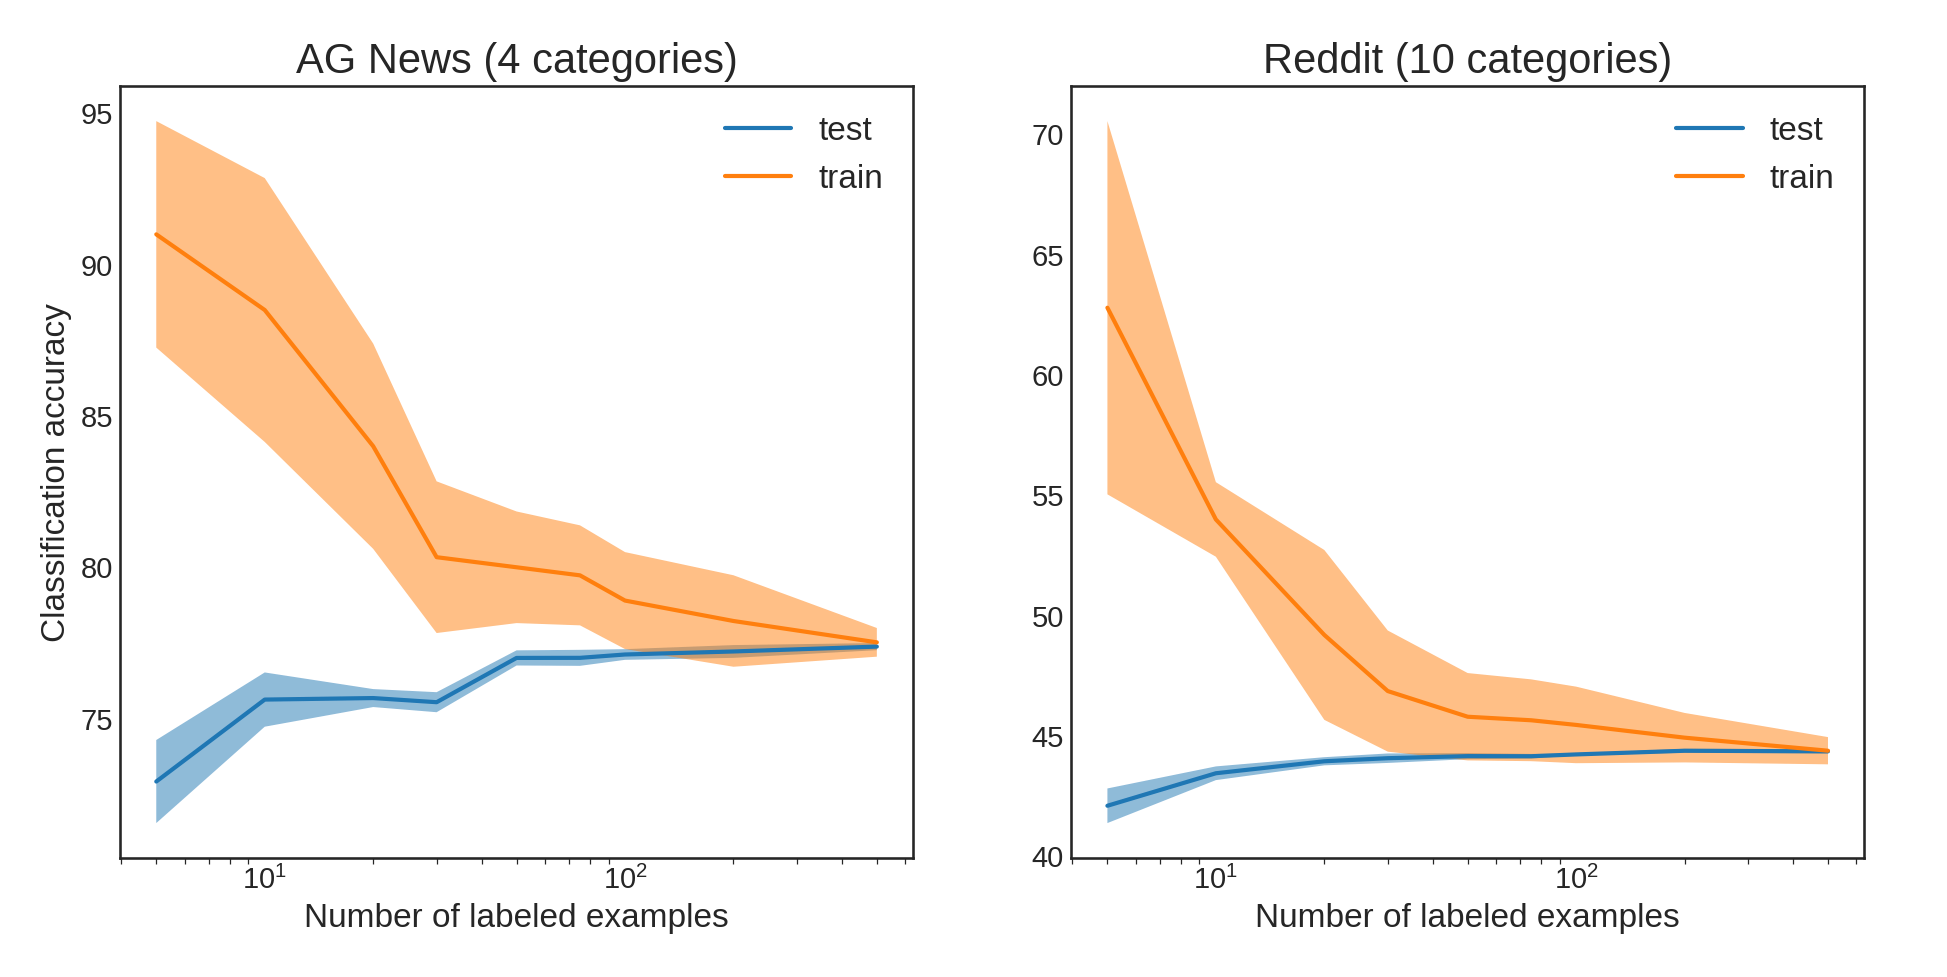 Average train (orange) and test (blue) classification accuracy with training performed on an increasing number of annotated examples for both the AG News (left) and Reddit (right) datasets. The error bars represent one standard deviation, determined by randomly sampling different labeled examples for each training sample size.